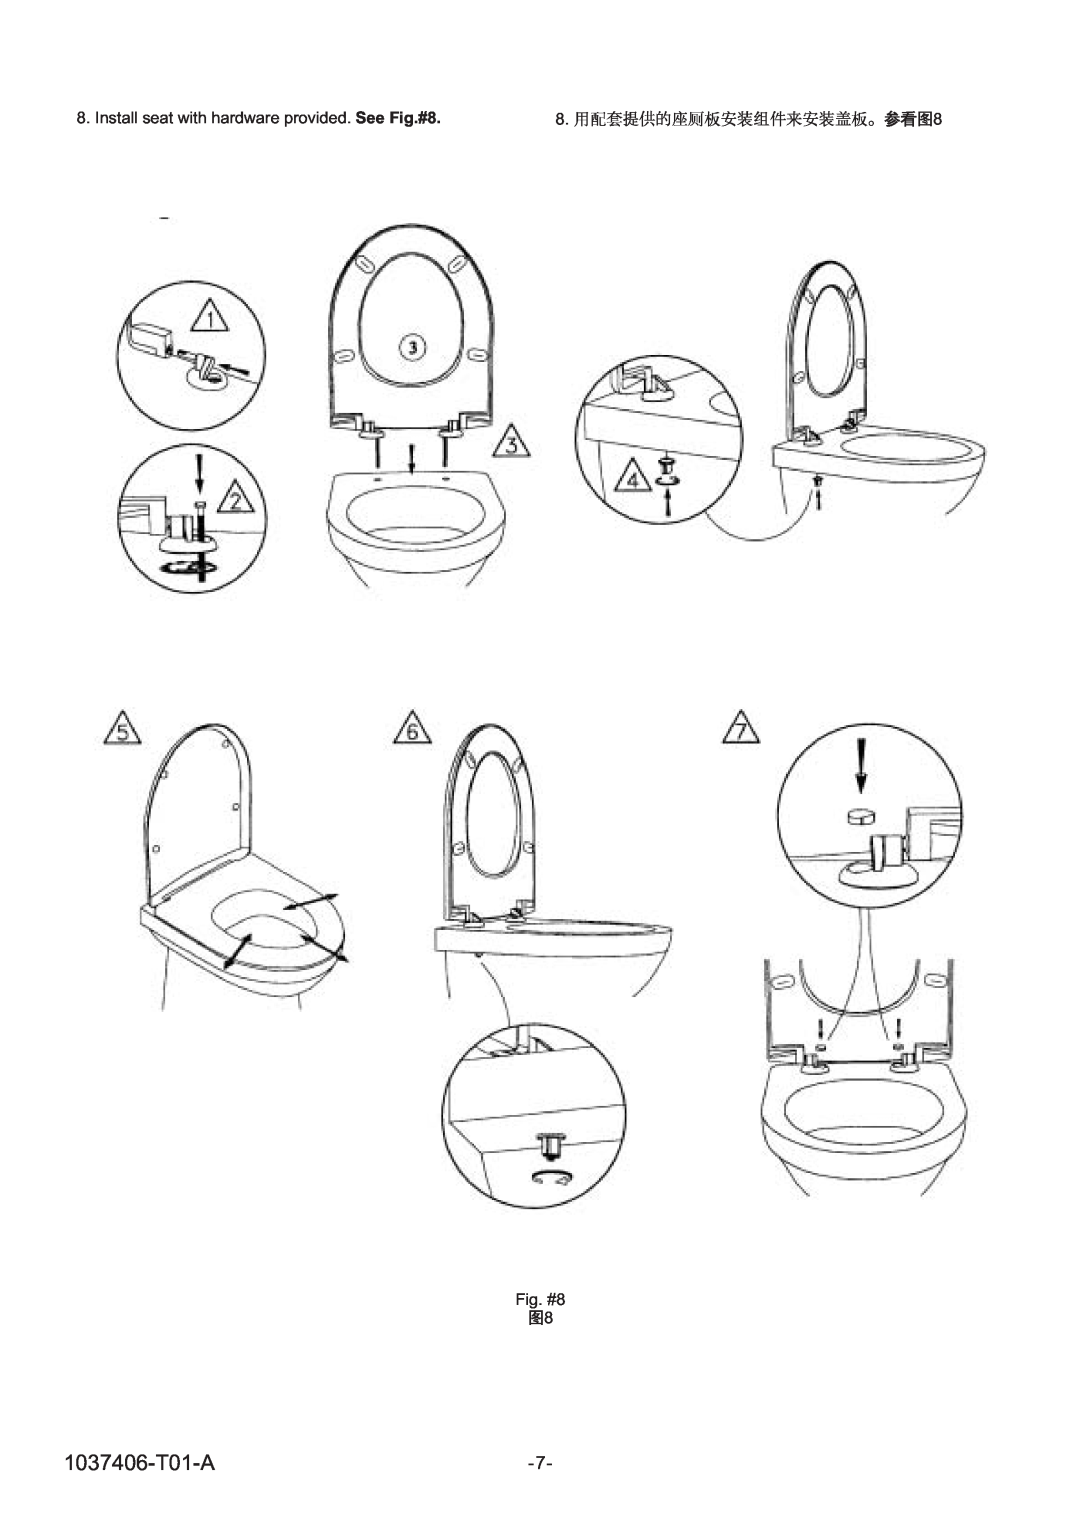 Kohler K-11184T, K-8766T, K-8753T, K-8741T, K-8711T, K-8709T, K-8710T, K-8767T warranty 1037406-T01-A, Fig. #8 